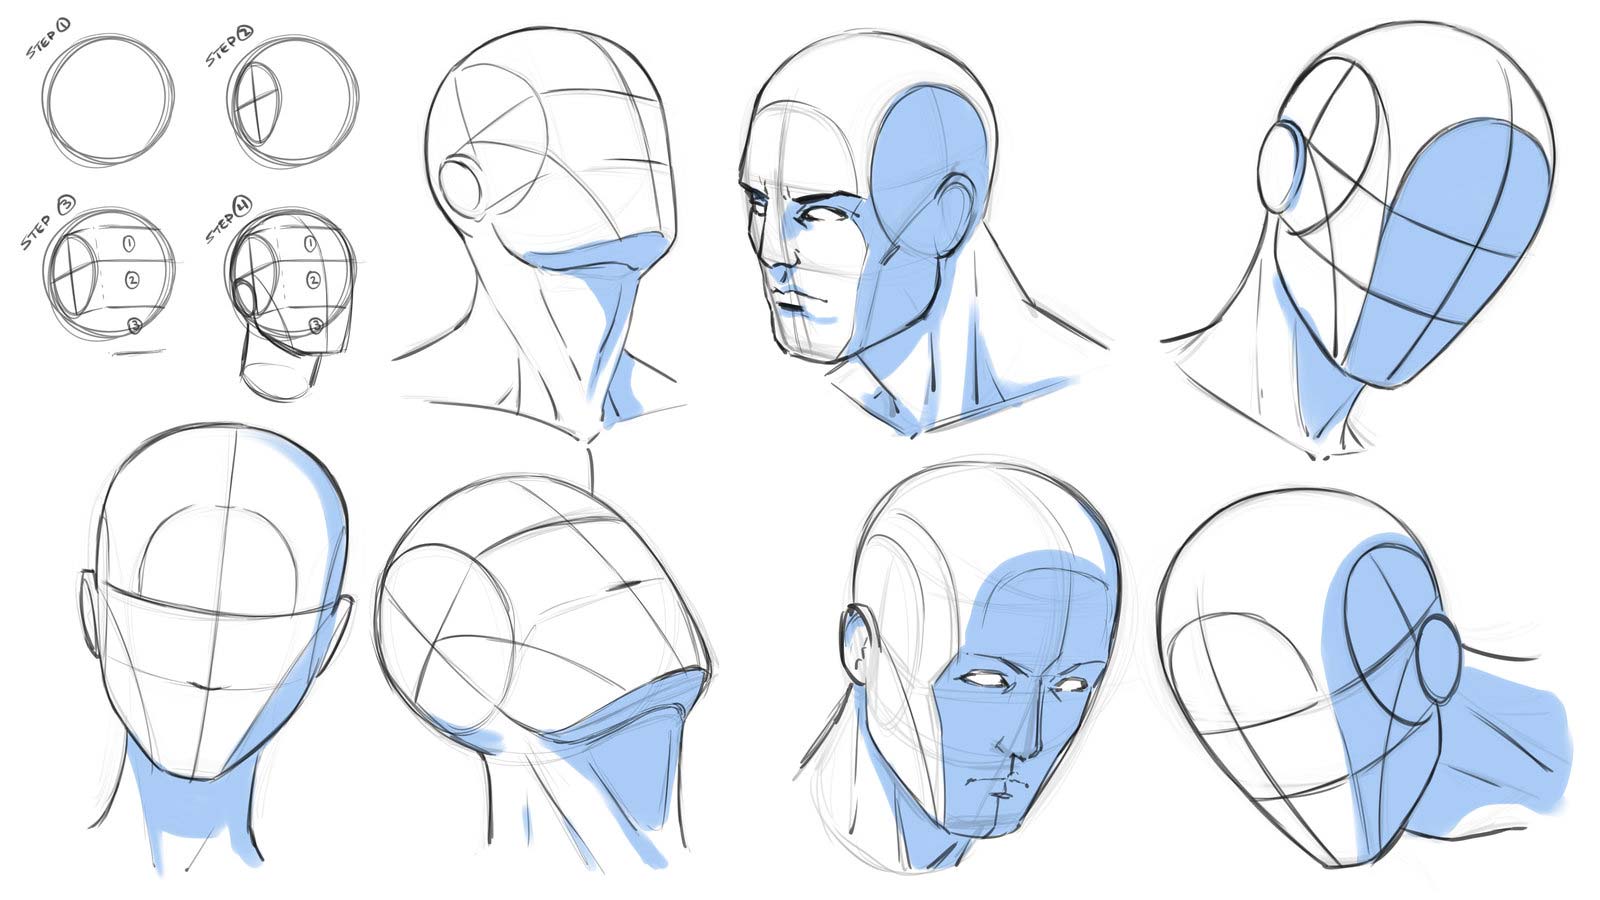 Head Drawing Reference and Sketches for Artists.